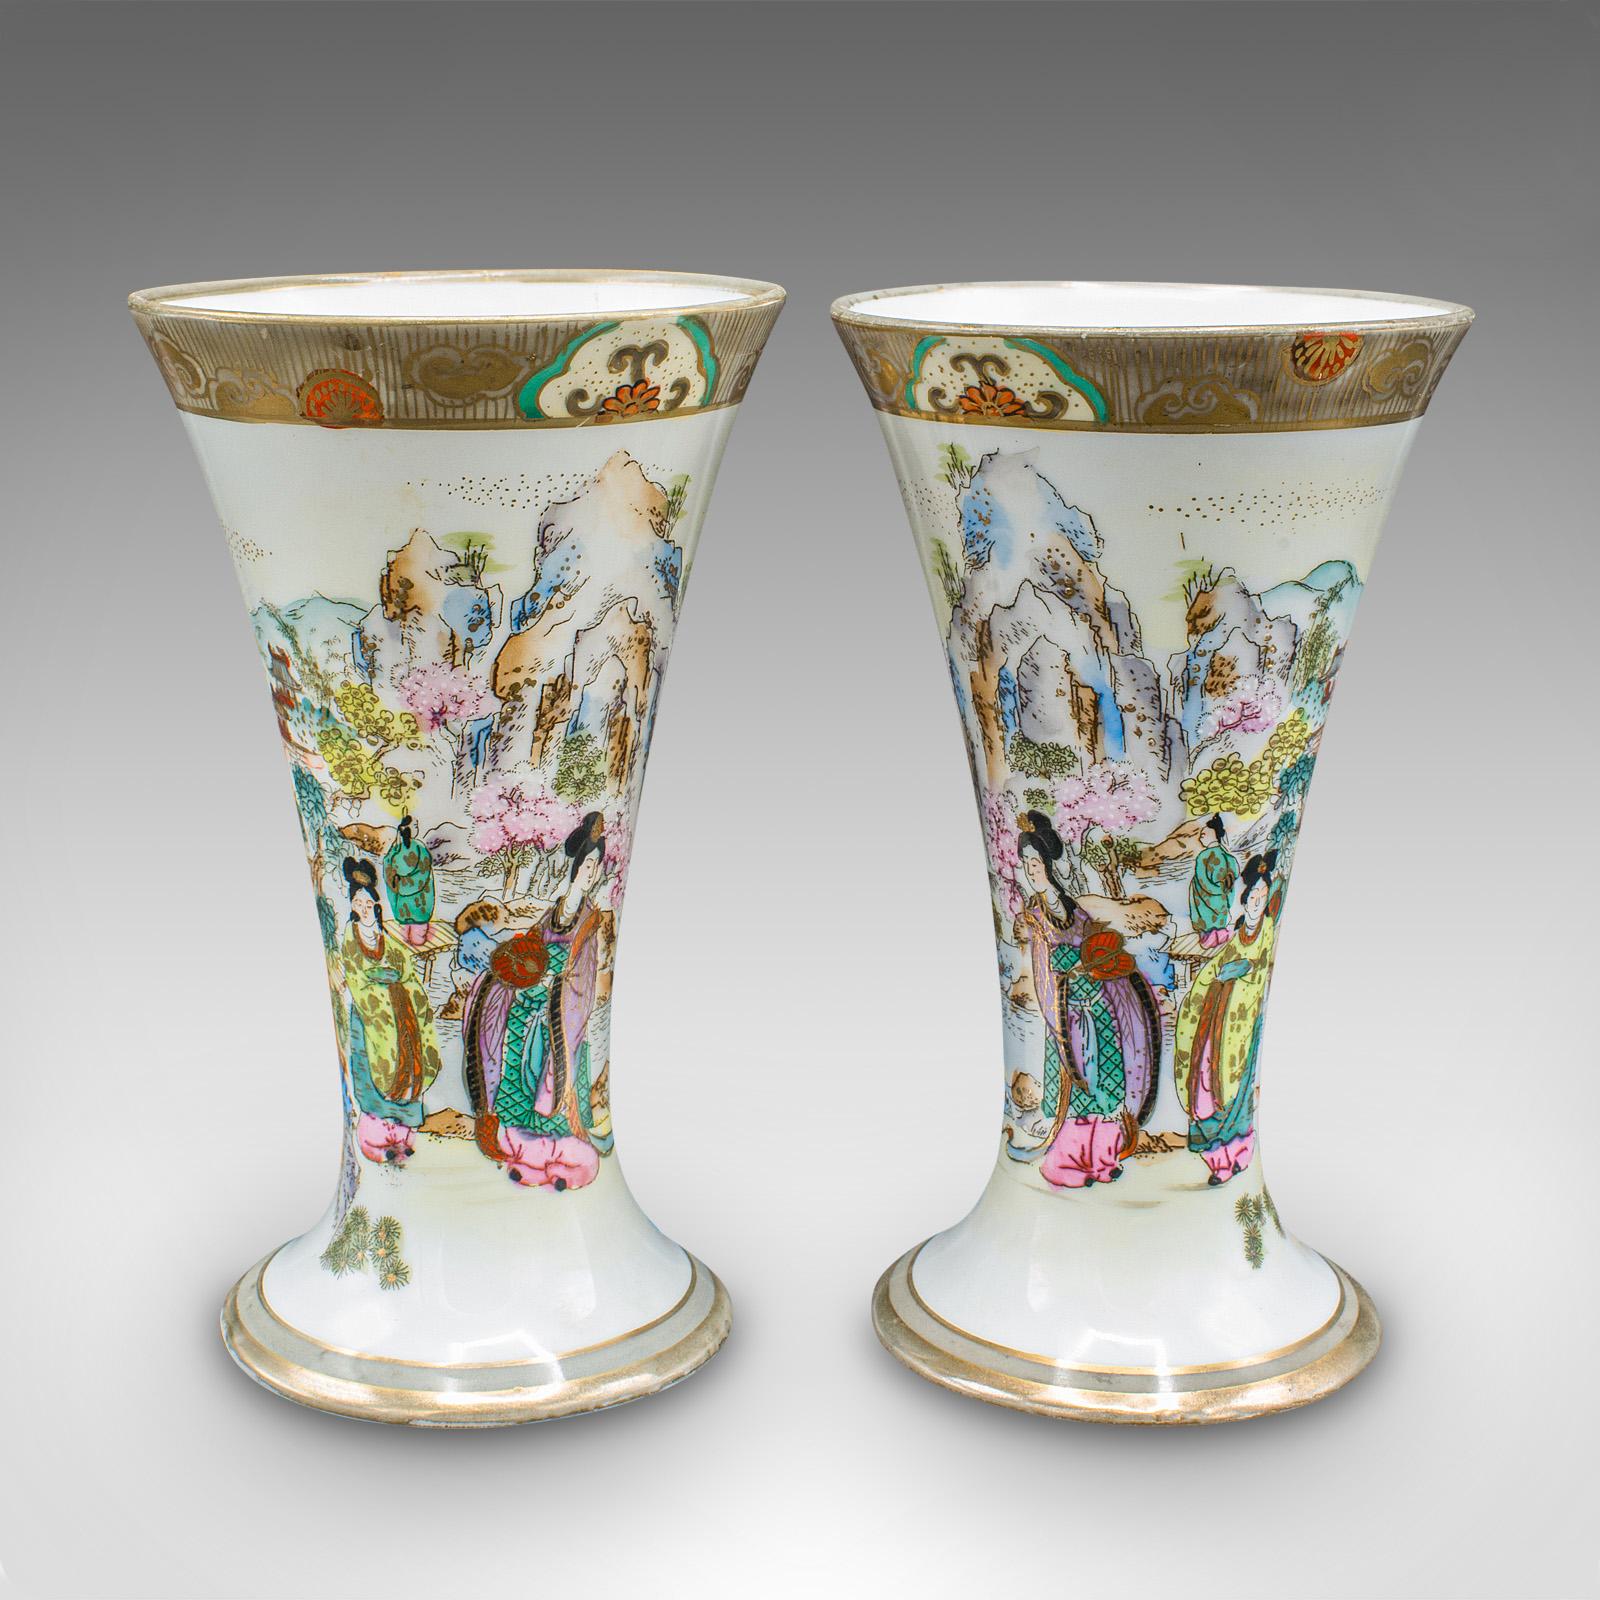 This is a pair of vintage decorative flower vases. A Japanese, ceramic stem flute by Noritake, dating to the Art Deco period, circa 1930.

Charming decor to this petite pair of vases
Displaying a desirable aged patina and in good order
White ceramic